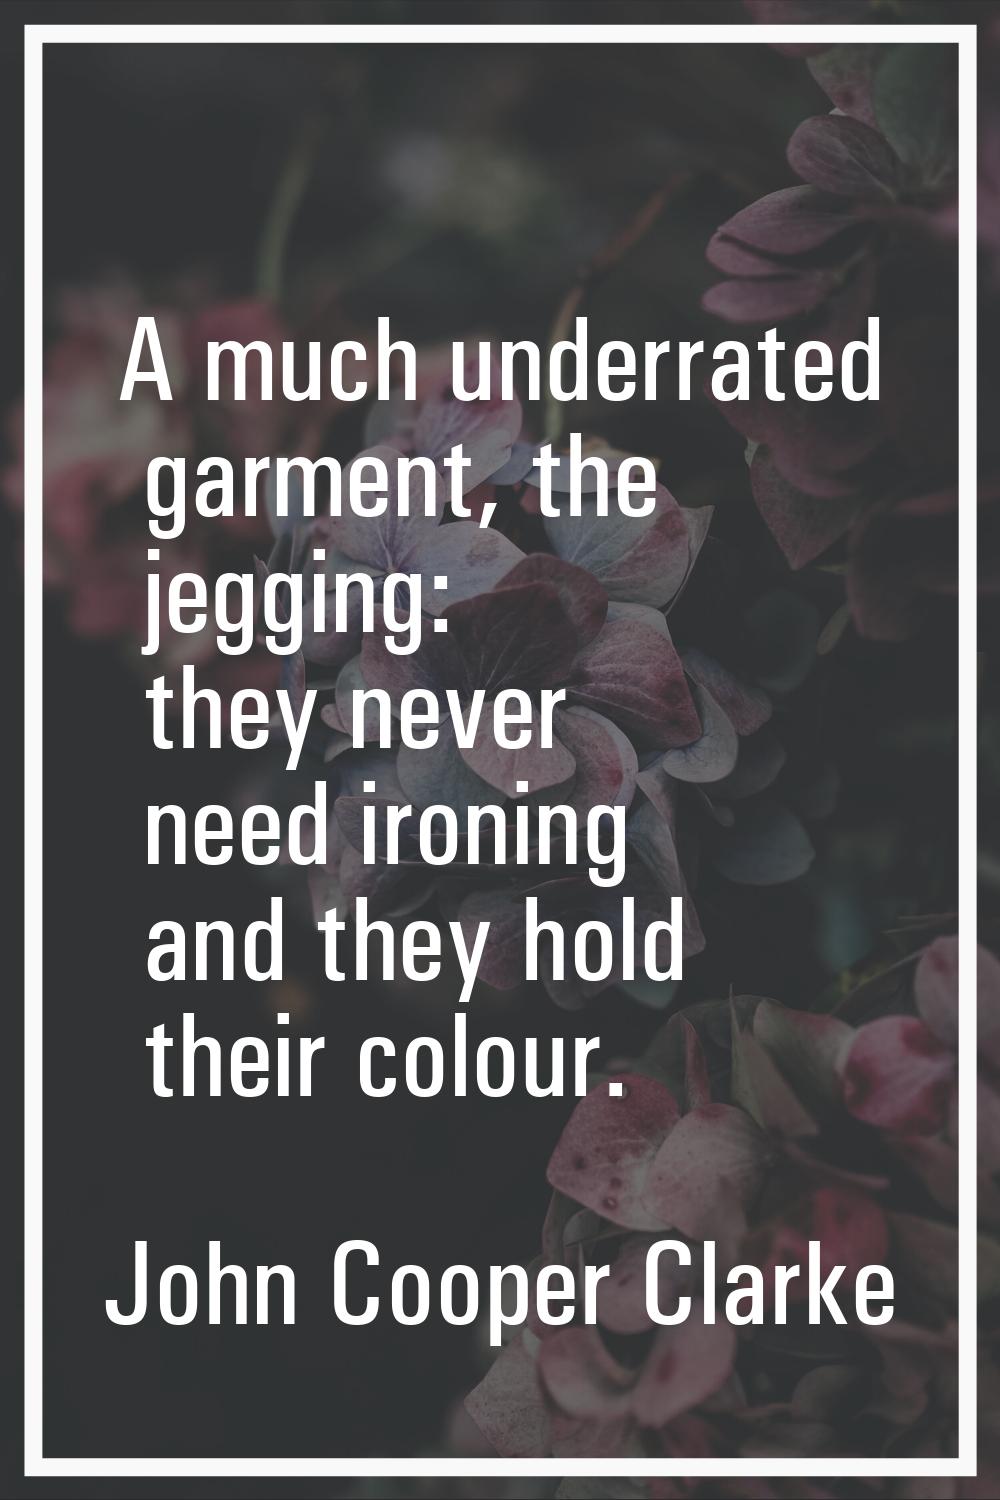 A much underrated garment, the jegging: they never need ironing and they hold their colour.